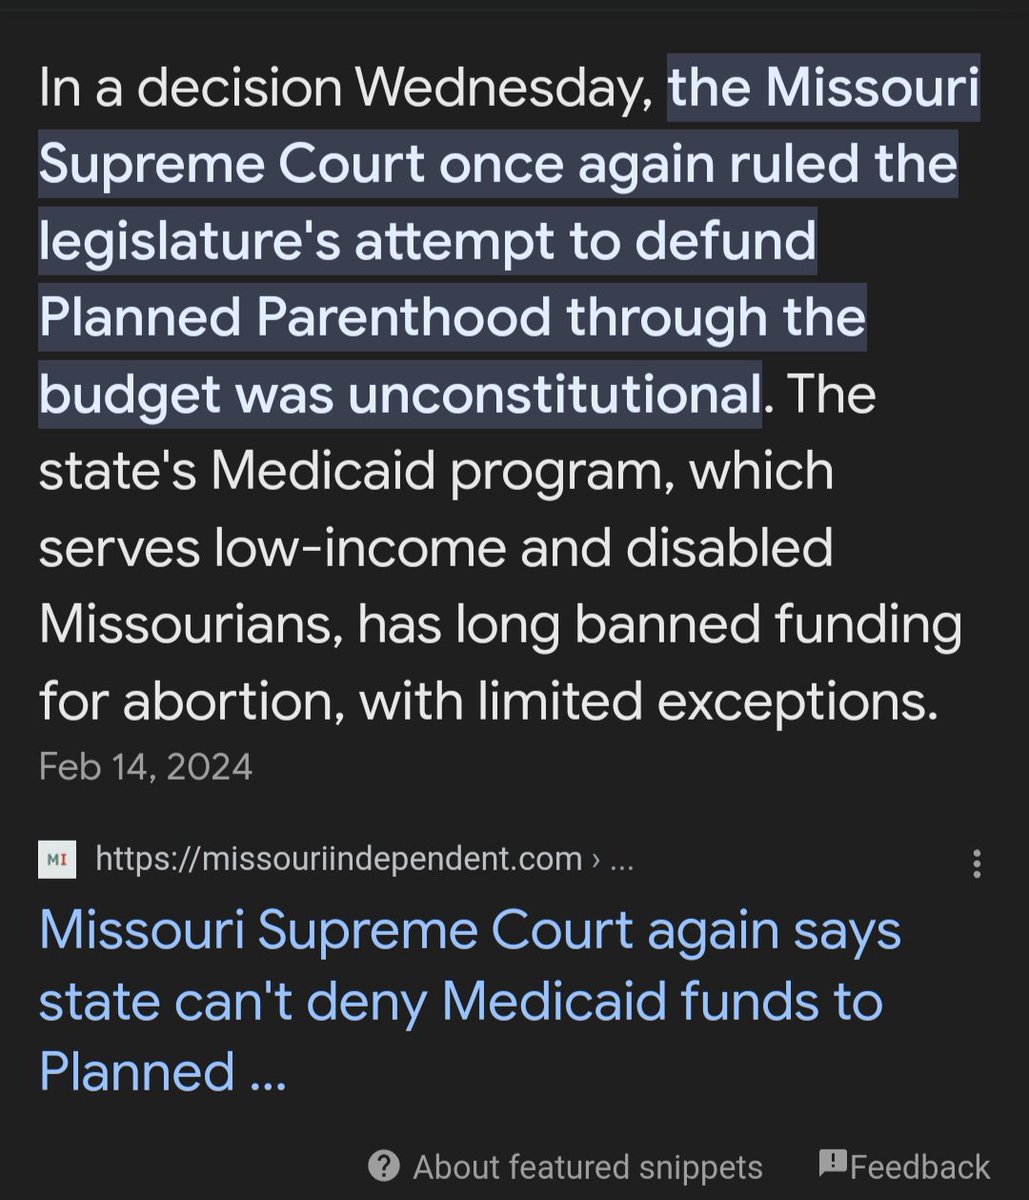 Again your defending will be struck down again Ms. Unconstitutionalist. Btw denying poor folks From receiving access to reproductive healthcare screenings isn't what Jesus would do hypocrite